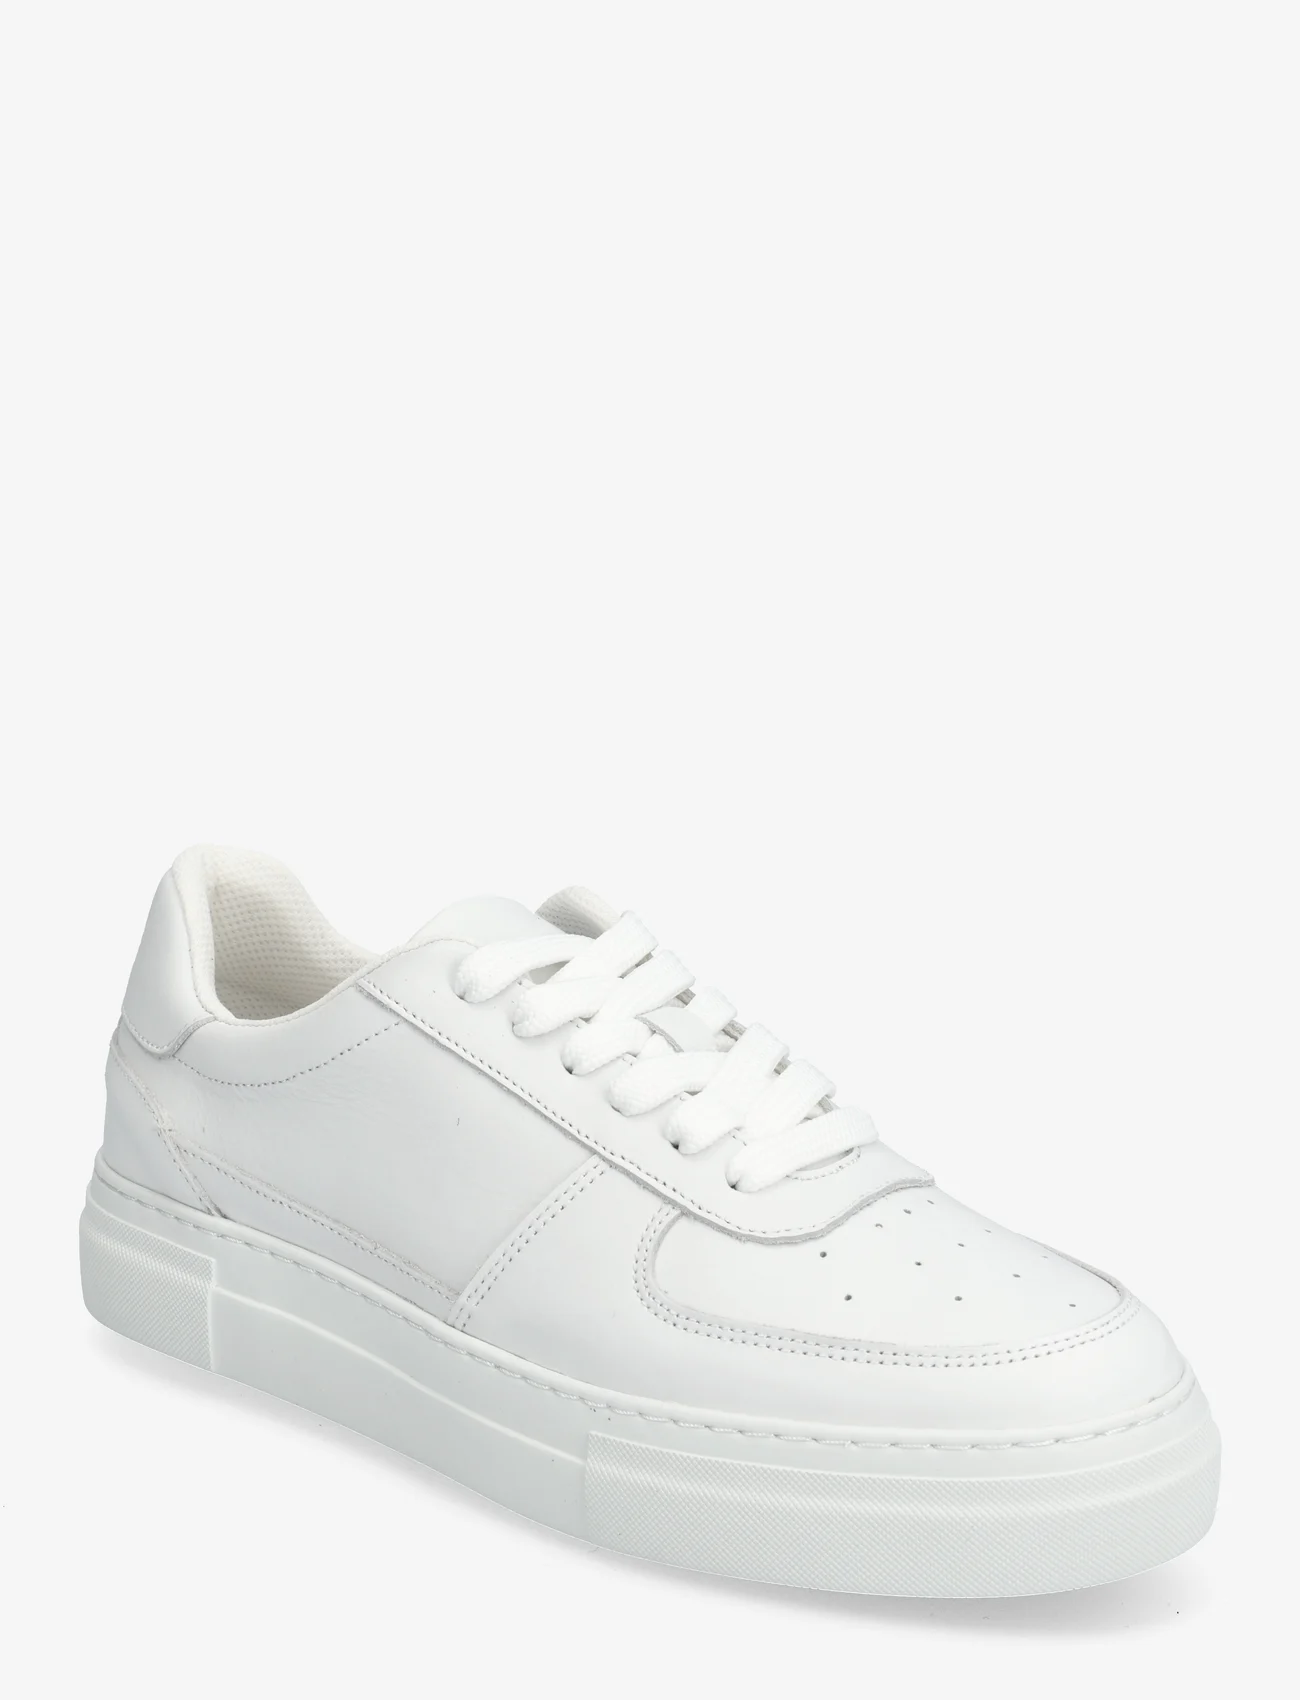 Selected Homme - SLHHARALD LEATHER SNEAKER - låga sneakers - white - 0